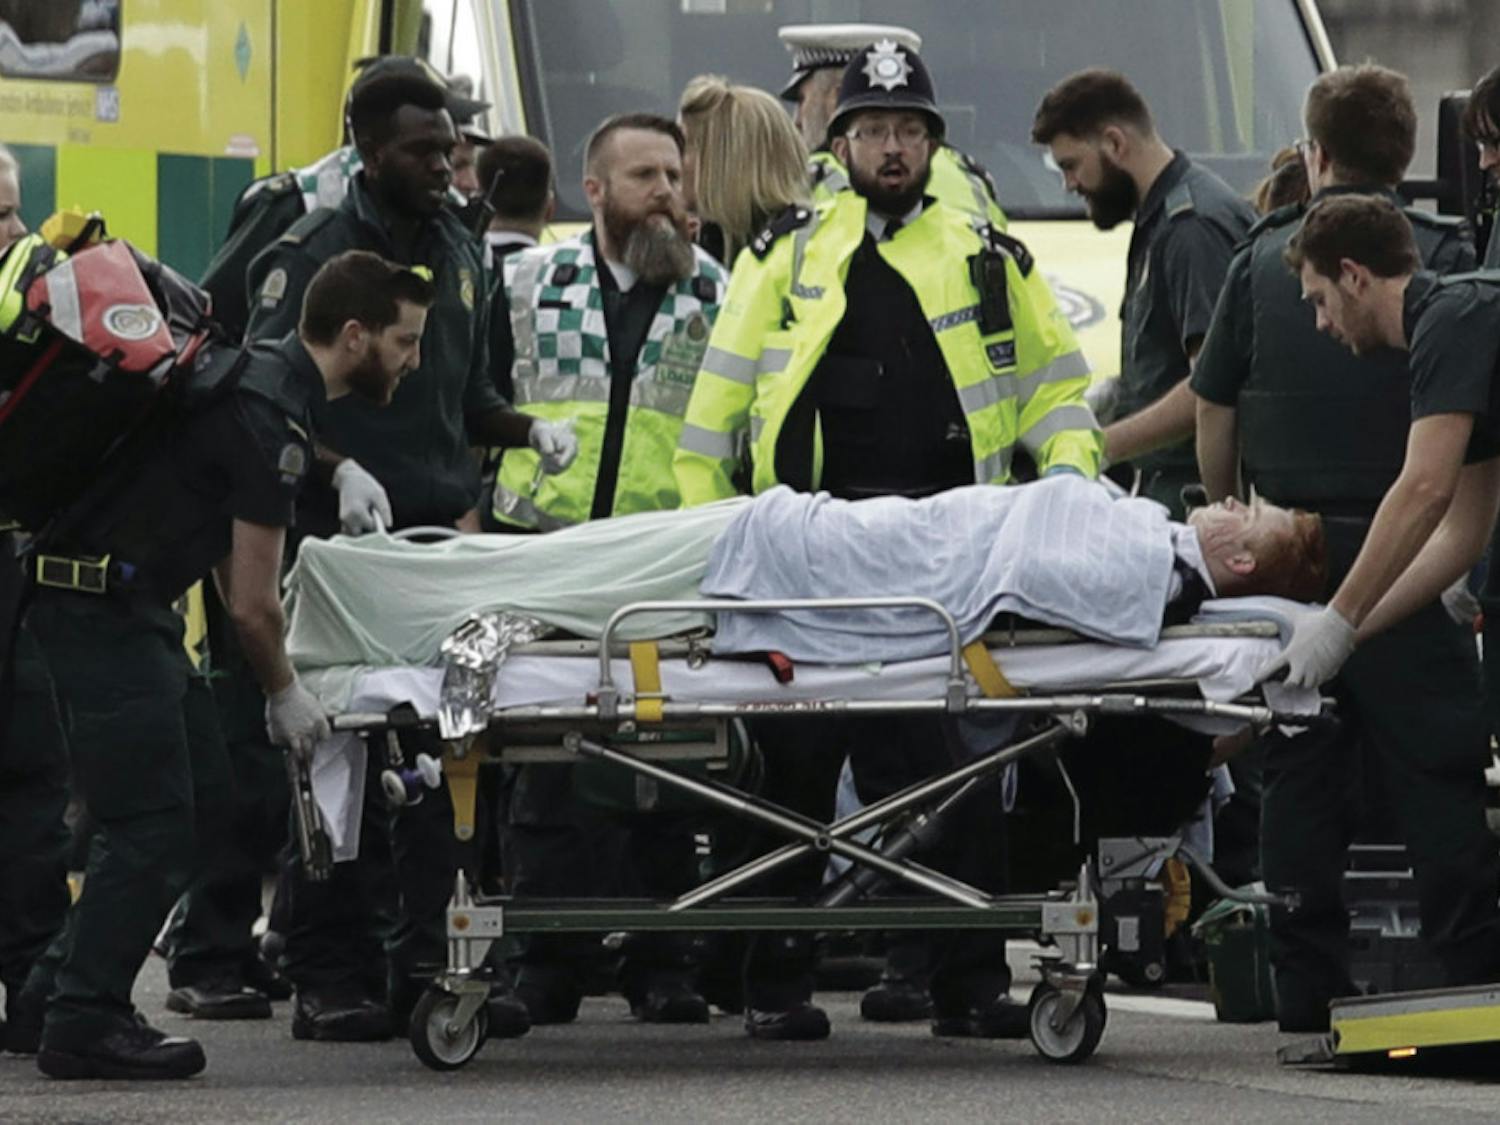 Emergency services staff provide medical attention to injured people on the south side of Westminster Bridge, close to the Houses of Parliament in London, Wednesday, March 22, 2017. London police say they are treating a gun and knife incident at Britain's Parliament "as a terrorist incident until we know otherwise." The Metropolitan Police says in a statement that the incident is ongoing. Officials say a man with a knife attacked a police officer at Parliament and was shot by officers. Nearby, witnesses say a vehicle struck several people on the Westminster Bridge.&nbsp;